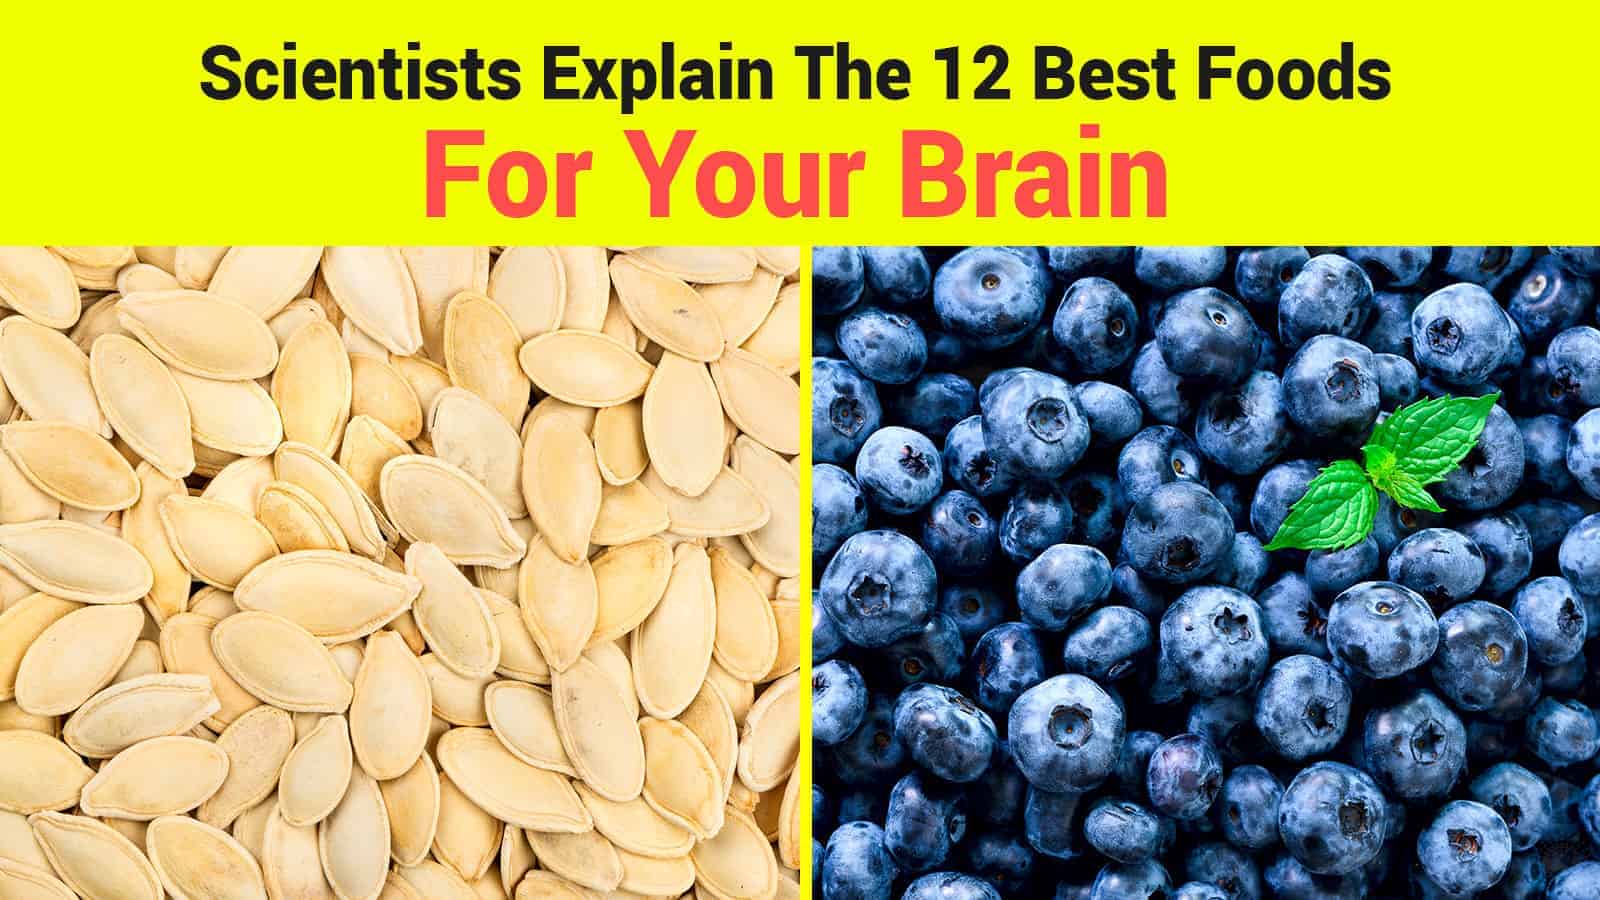 Scientists Explain The 12 Best Foods For Your Brain